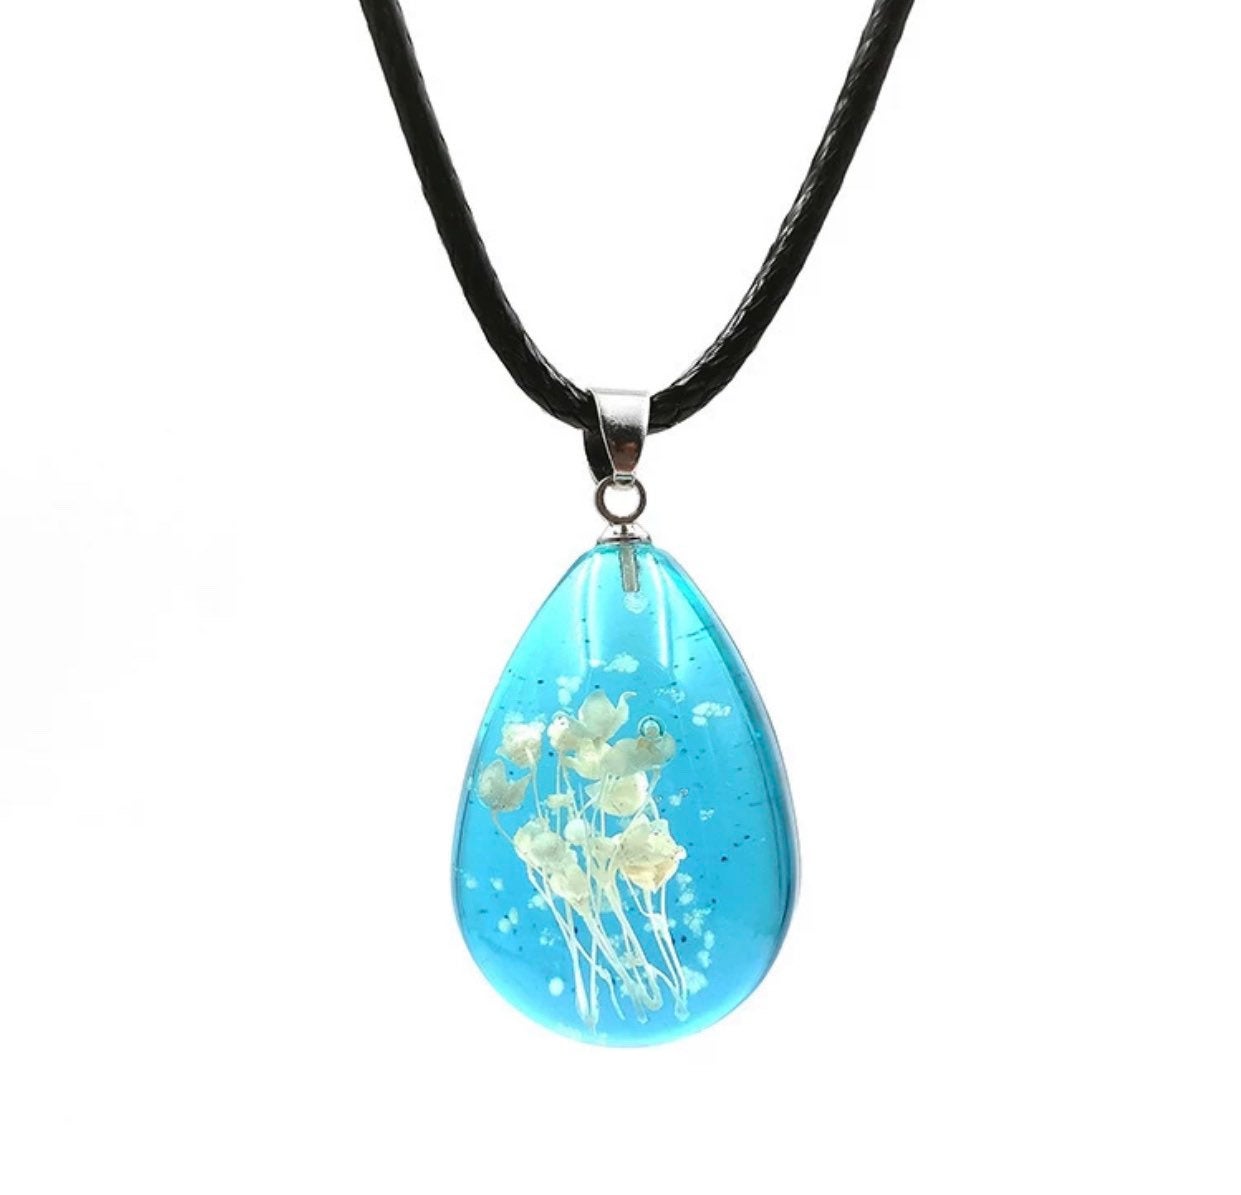 Real Flowers Pendant Necklace Encased in Resin that Glows in the Dark